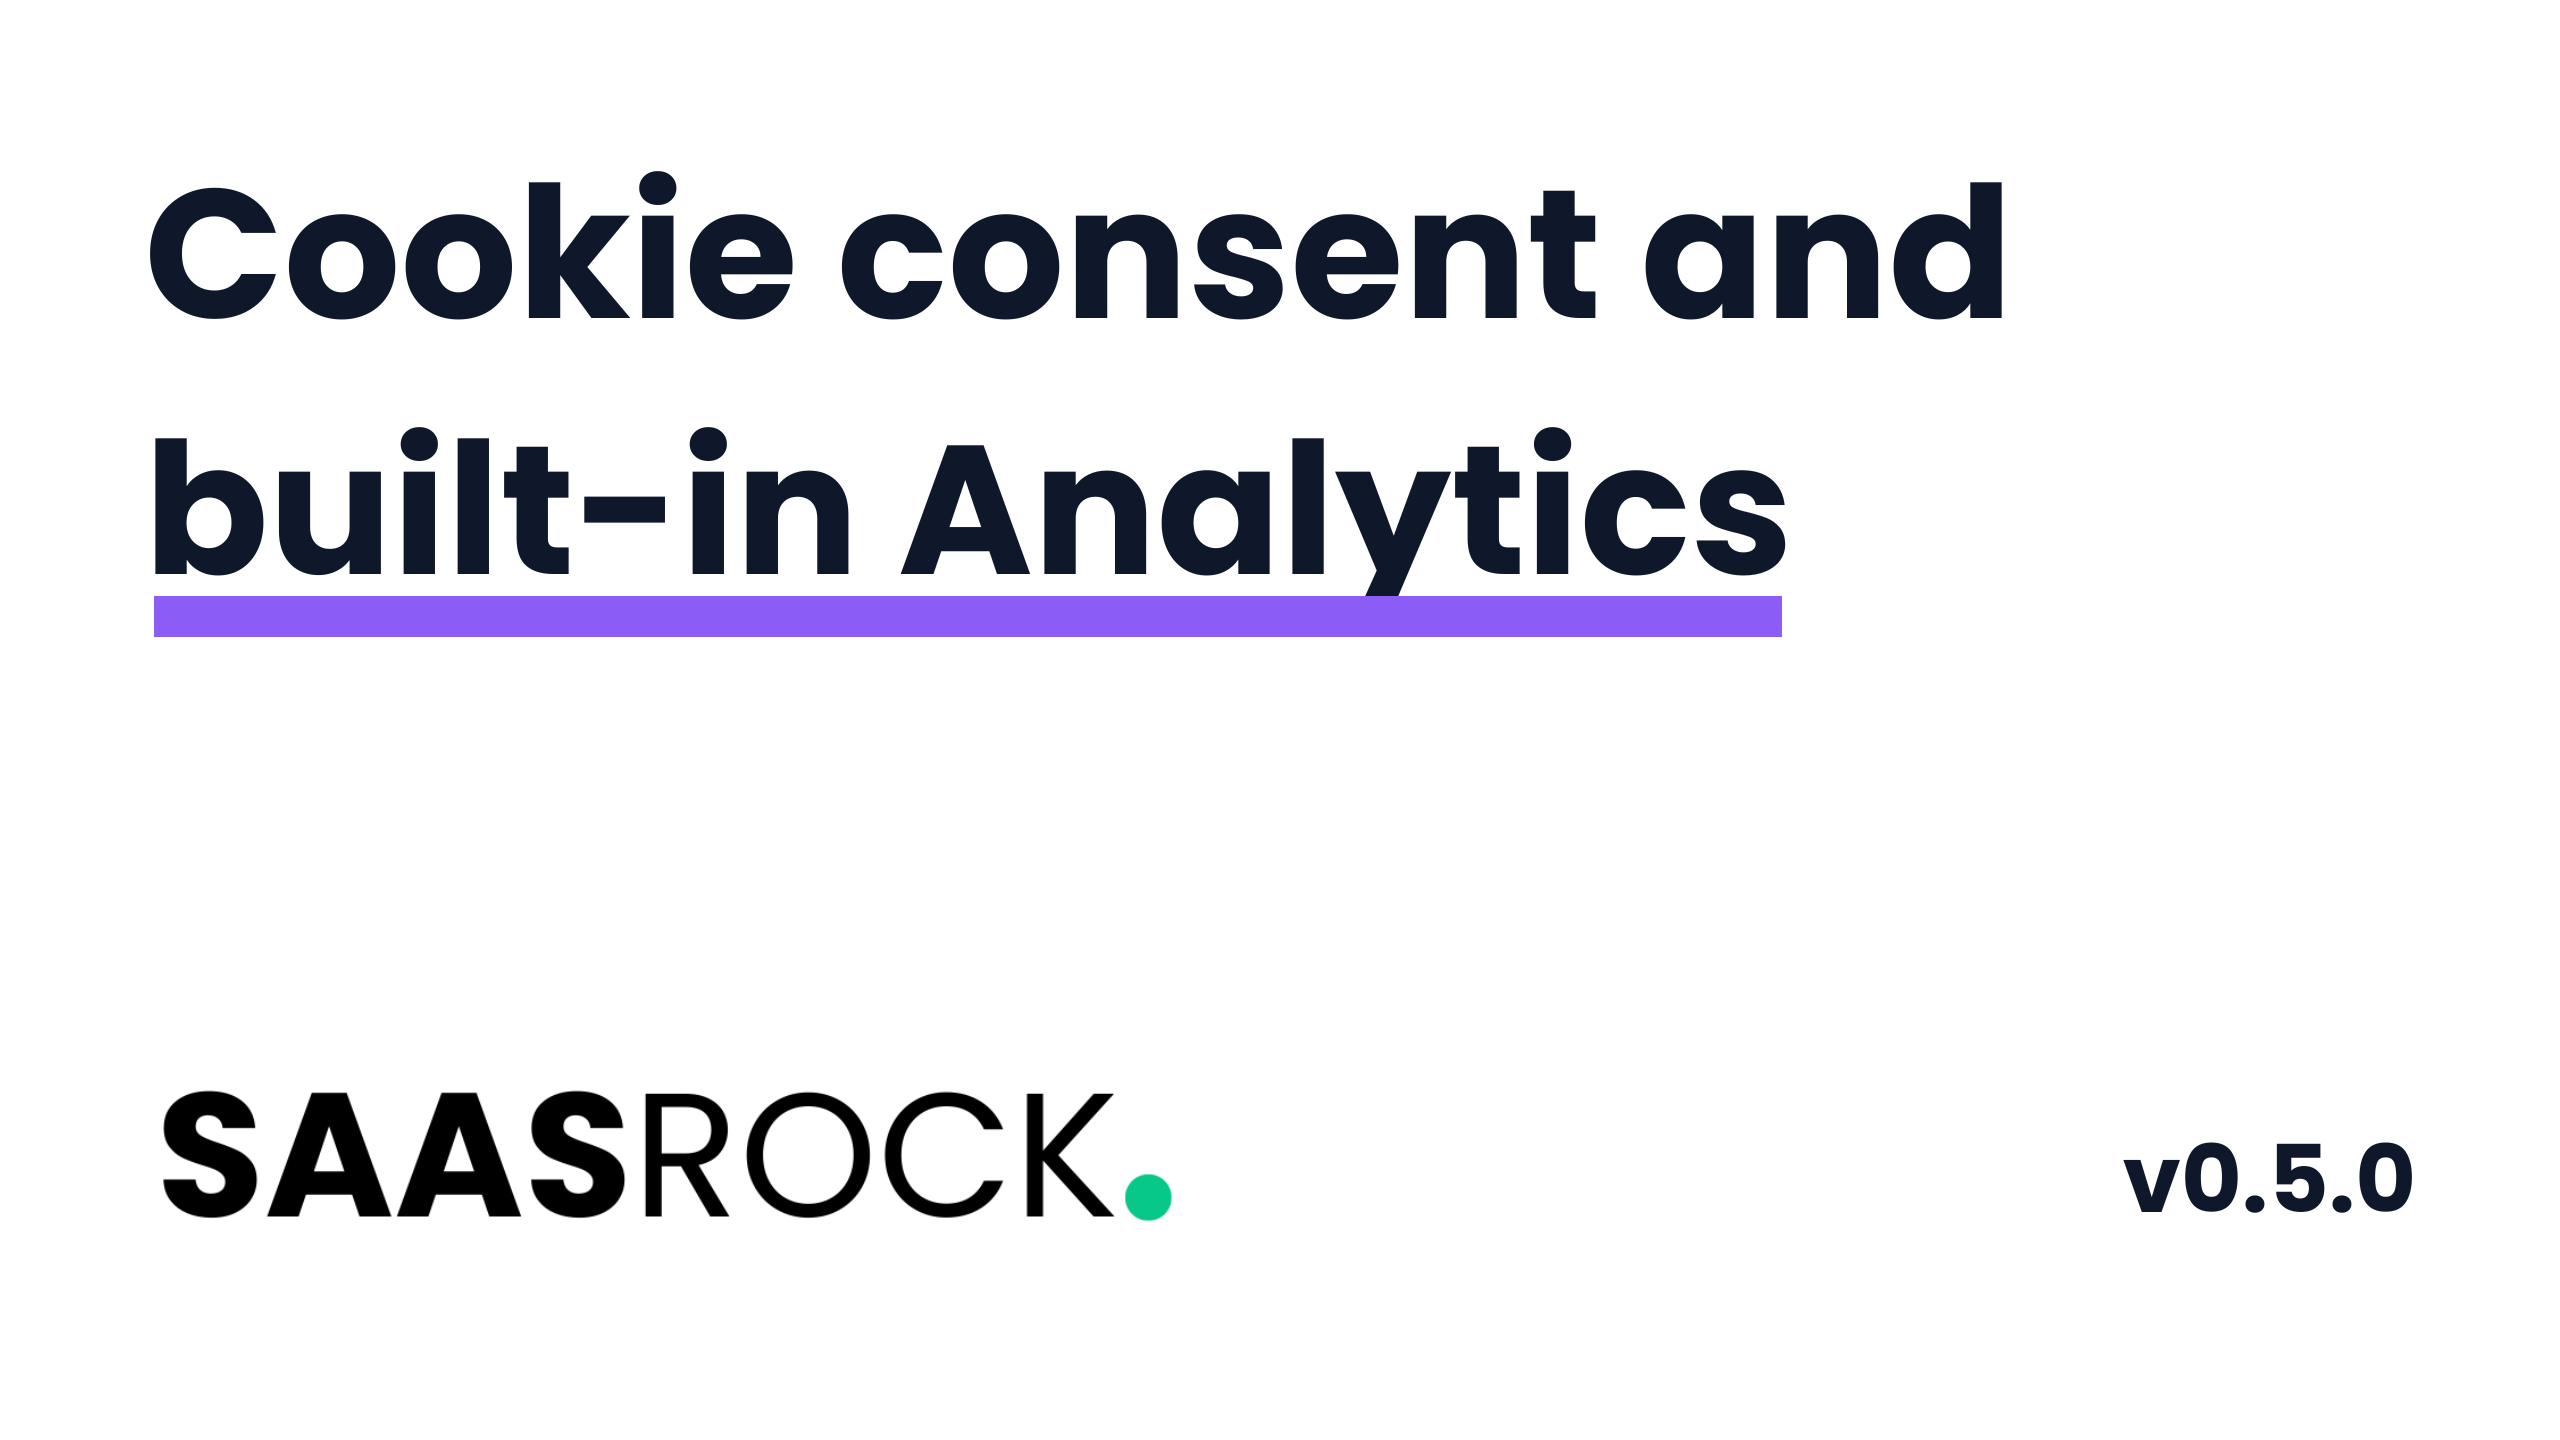 SaasRock v0.5.0 - Cookie consent and built-in Analytics